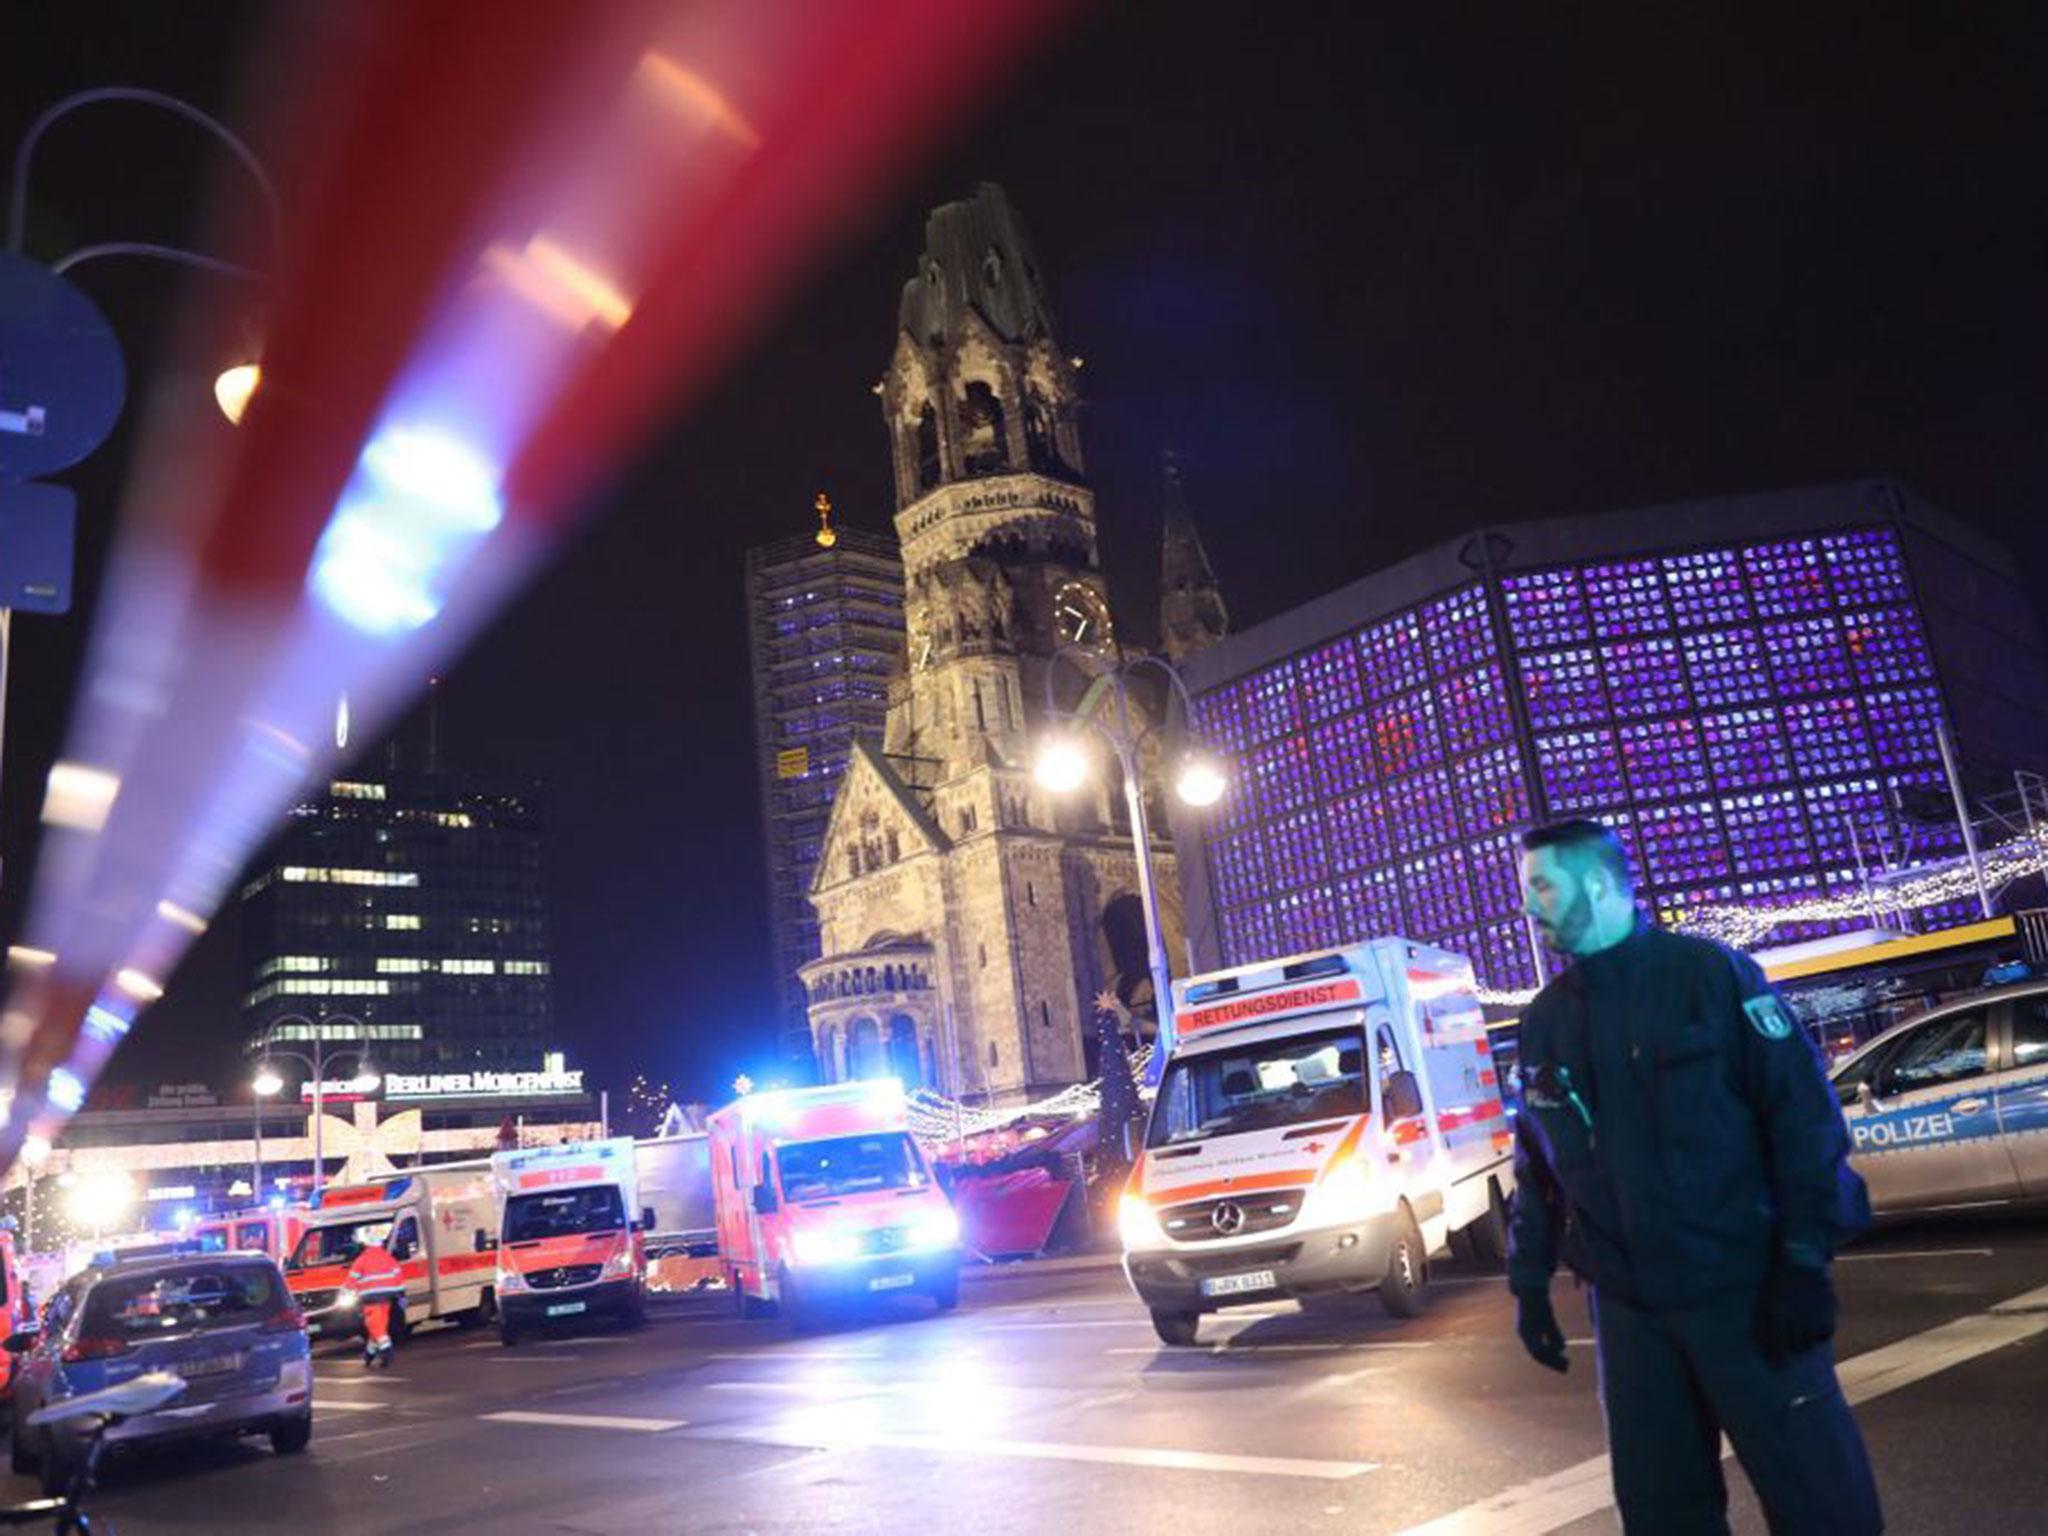 German policemen and rescue workers at the scene where a truck crashed into a Christmas market, close to the Kaiser Wilhelm memorial church in Berlin, Germany